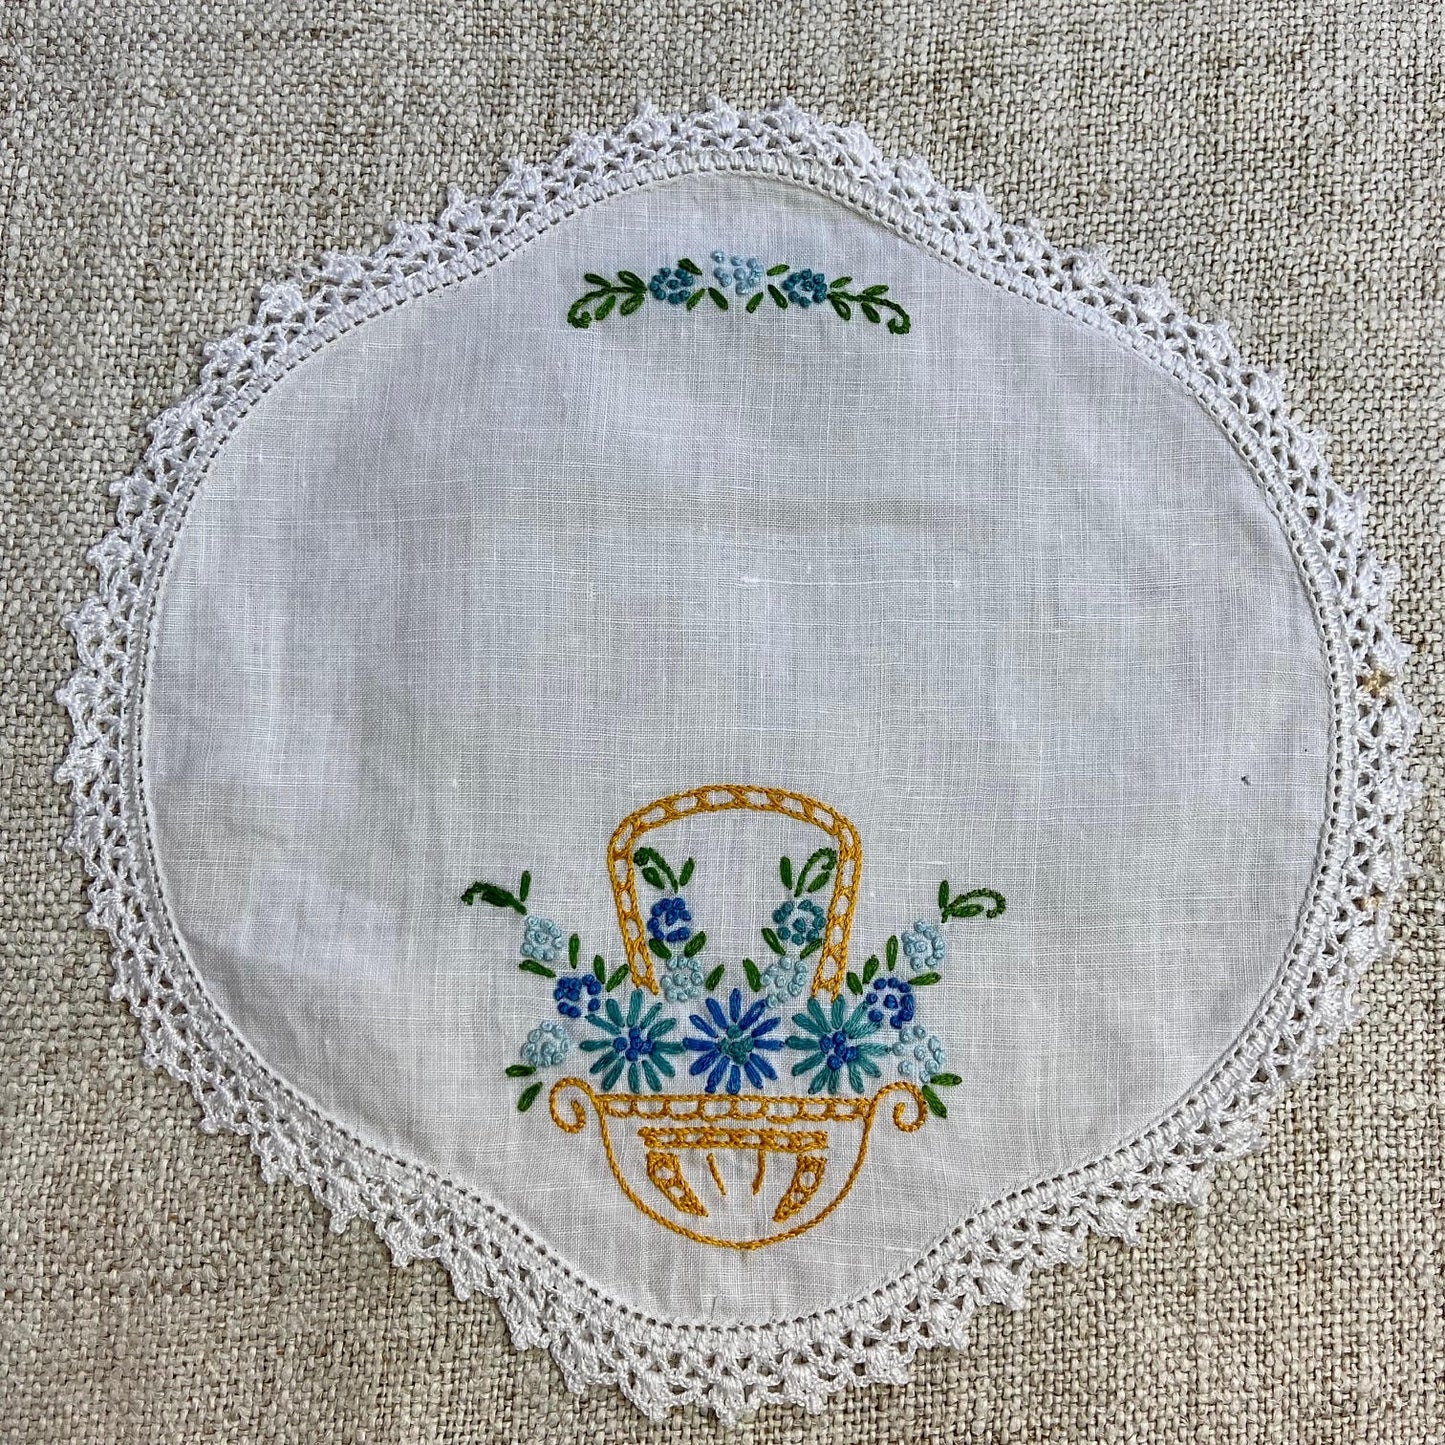 Two Doilies - Item 23551(A)